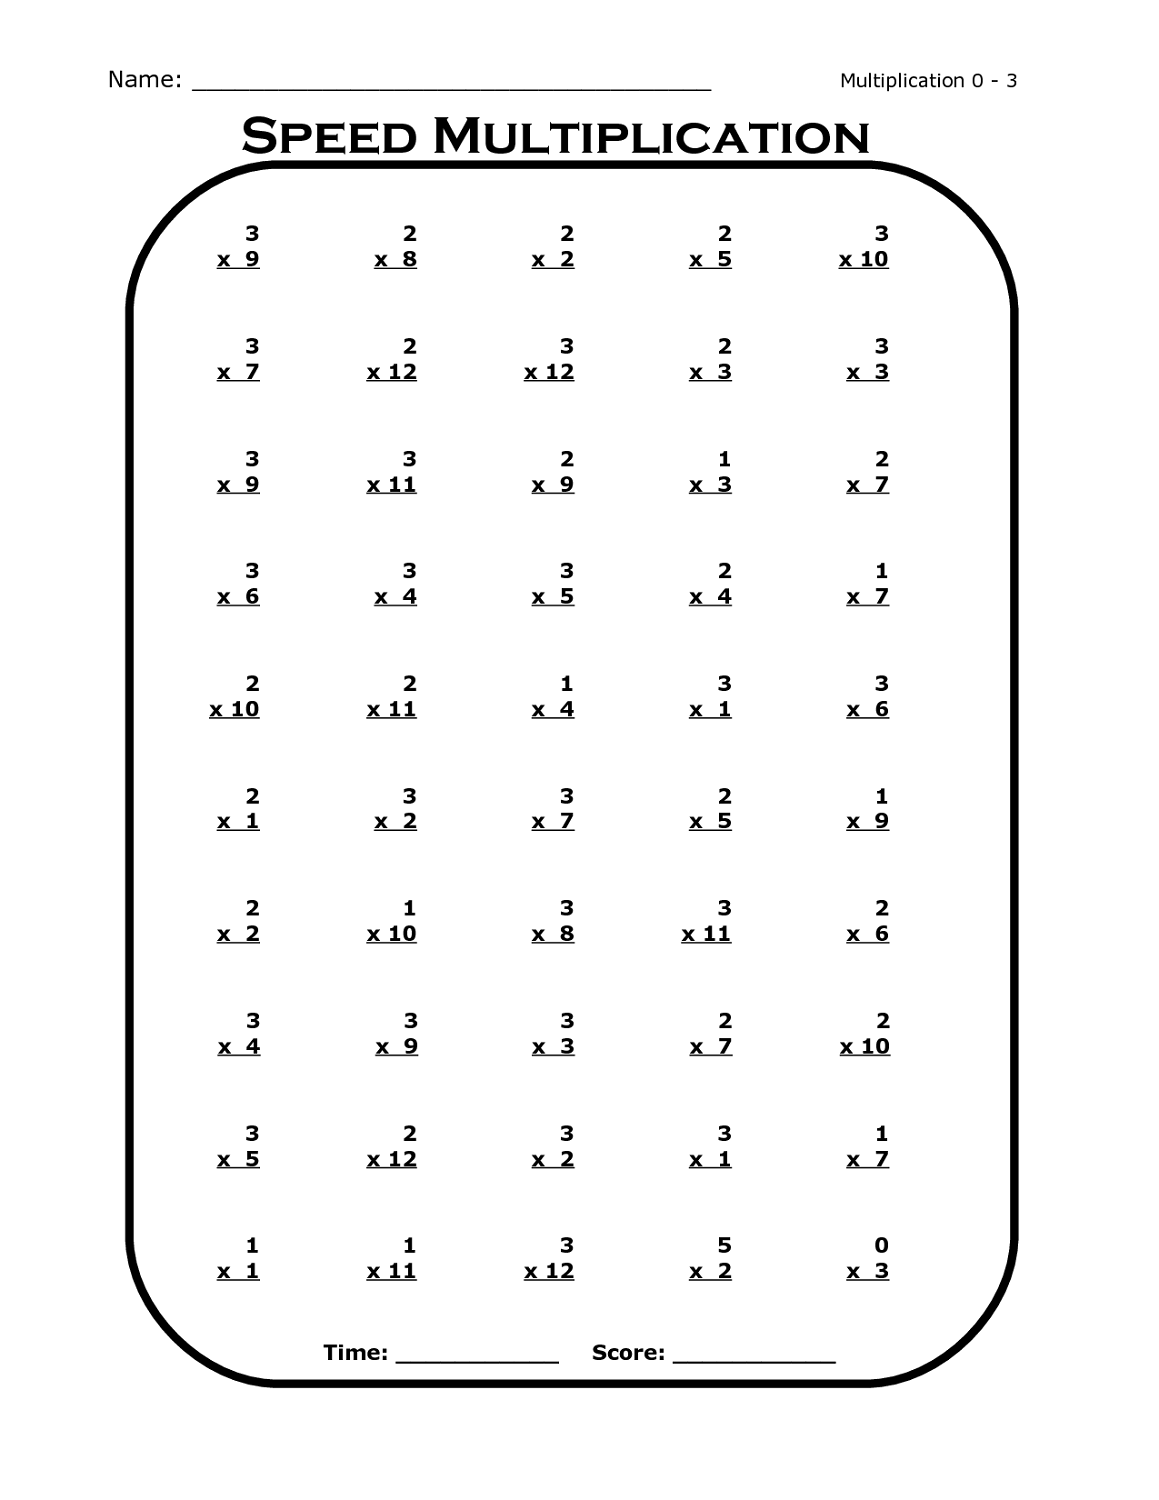 free multiplication worksheets for 3 times table